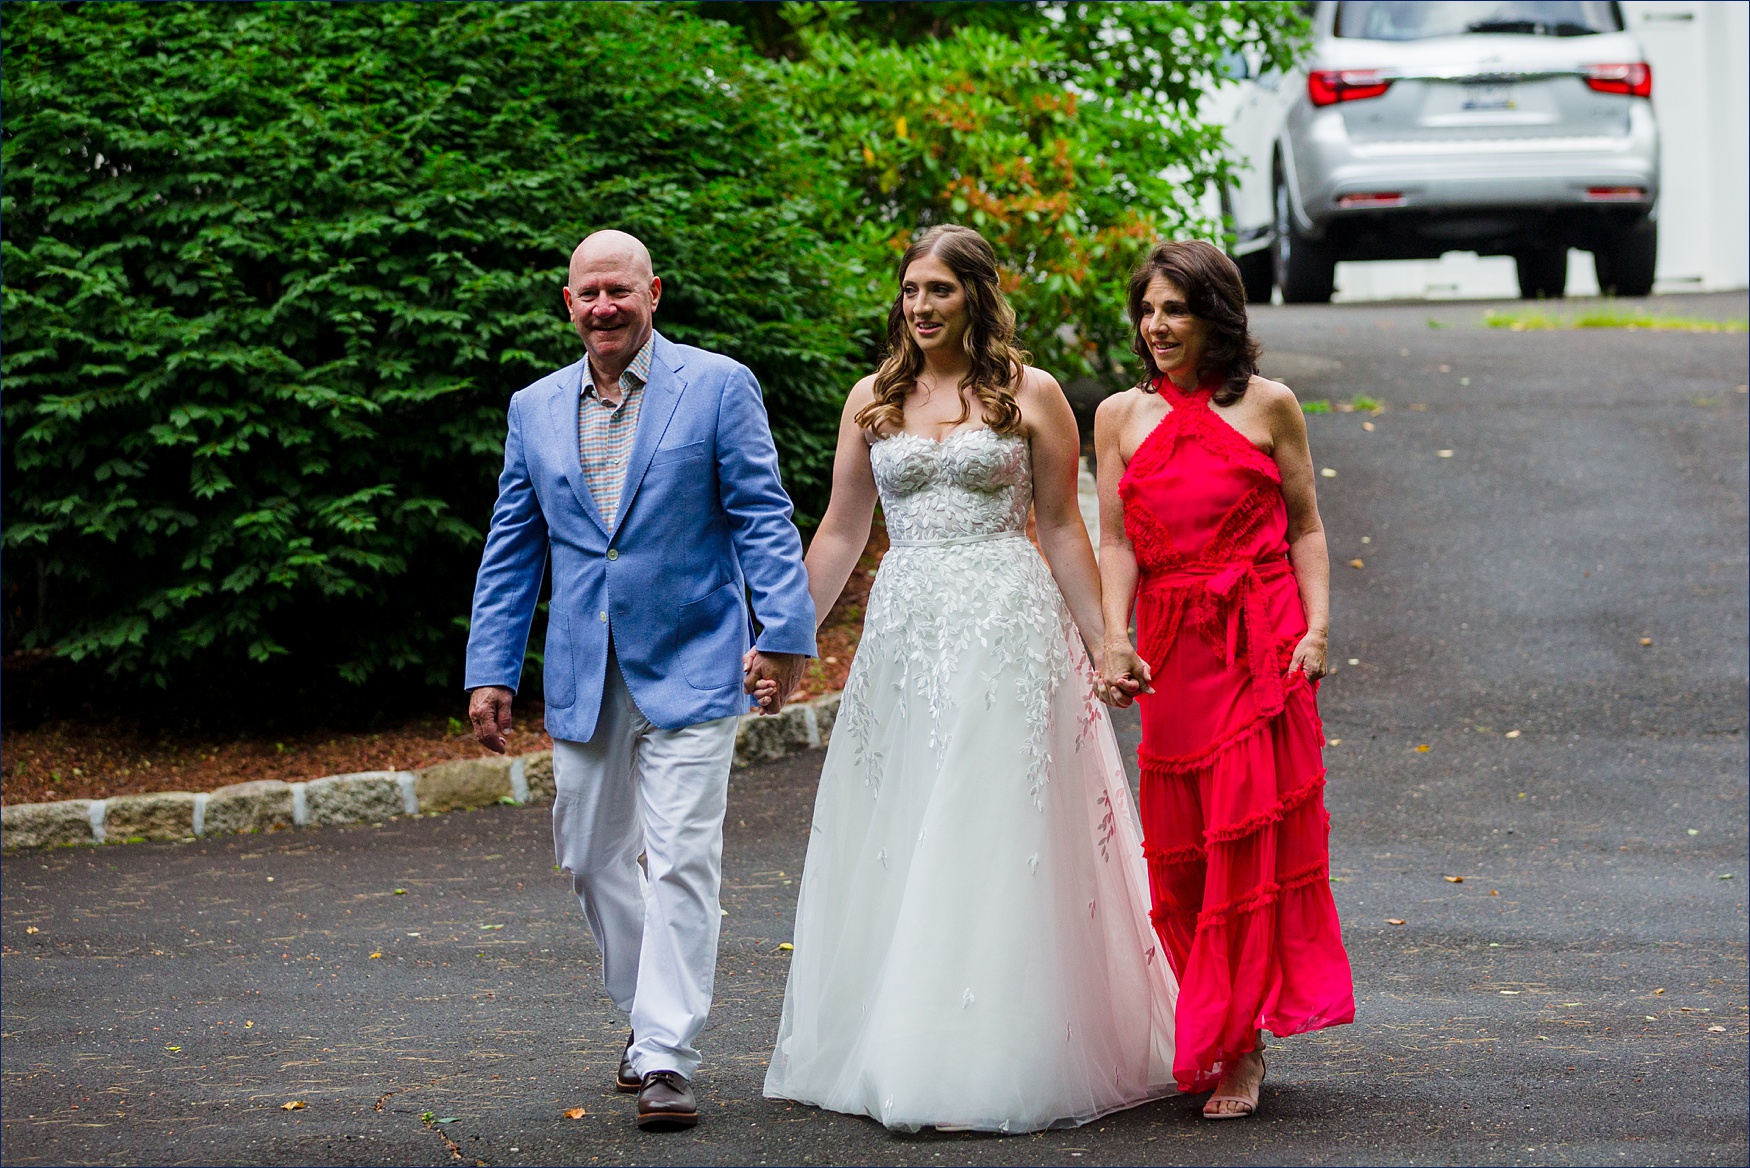 The bride and her parents enter the backyard intimate ceremony